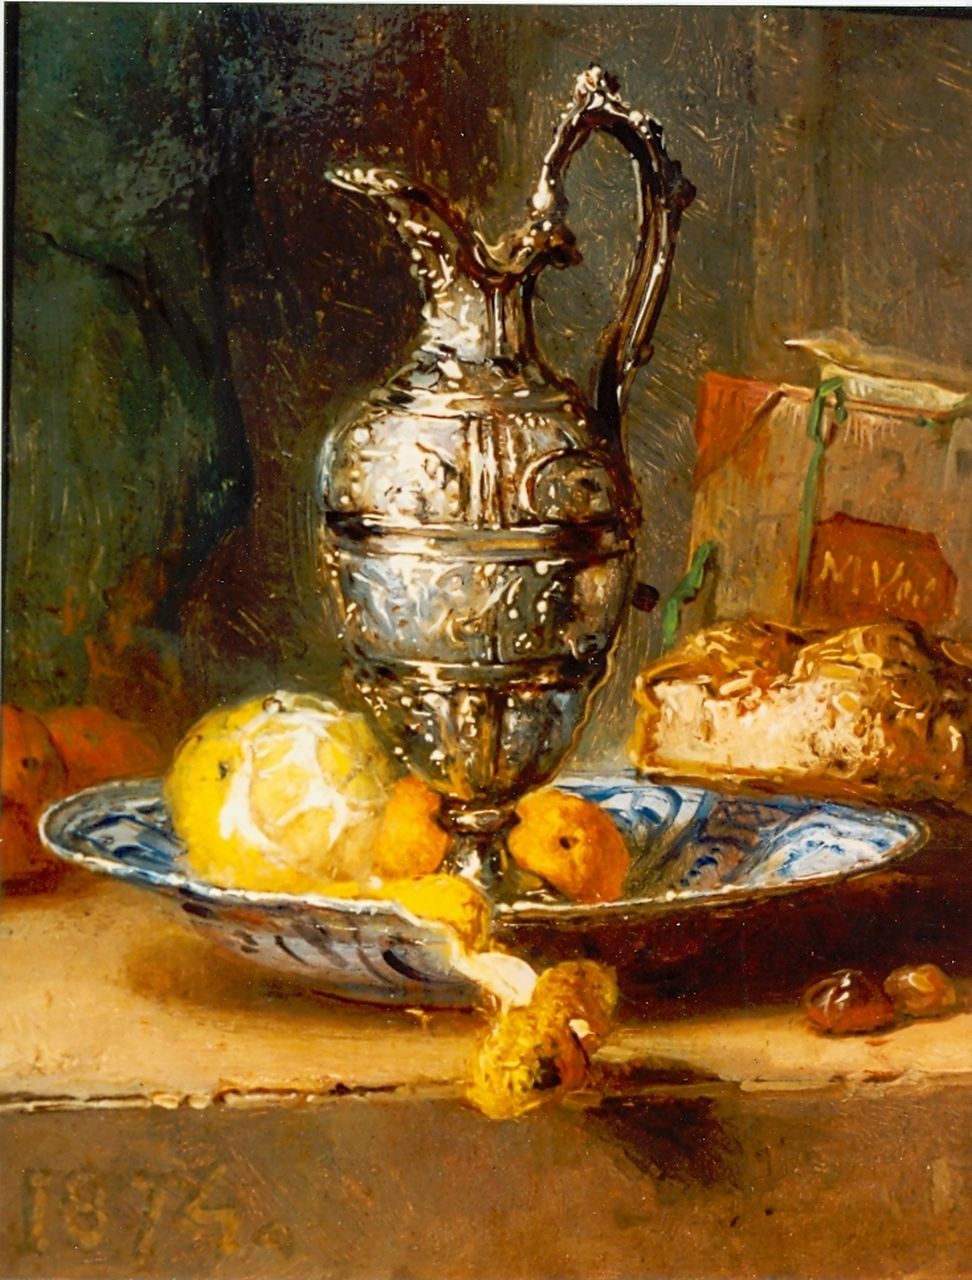 Vos M.  | Maria Vos, Still life with a silver vase, a peeled lemon on a wanli plate, Öl auf Holz 14,0 x 11,5 cm, signed l.l. und dated 1874